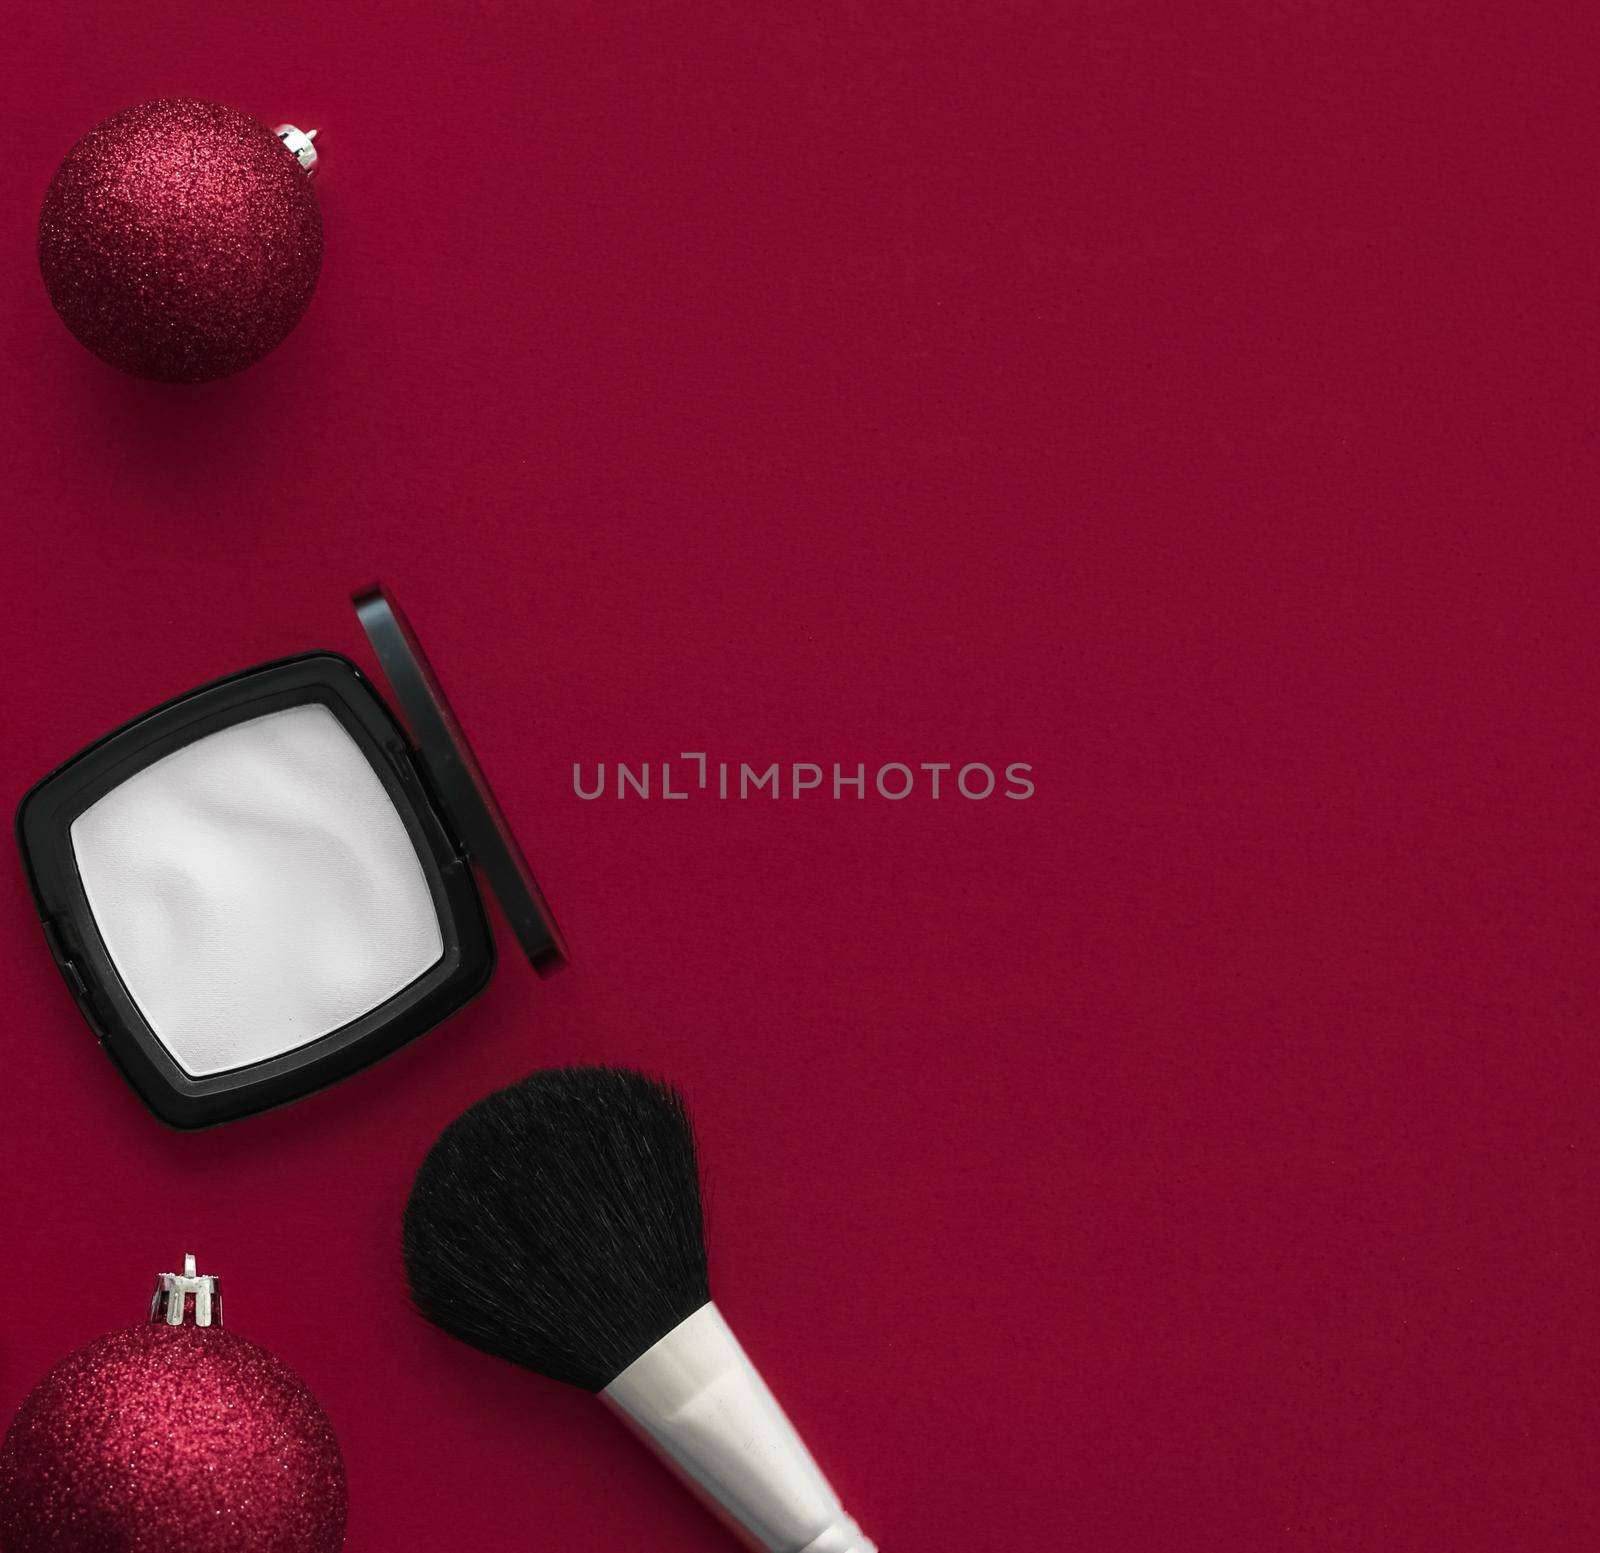 Cosmetic branding, fashion blog cover and girly glamour concept - Make-up and cosmetics product set for beauty brand Christmas sale promotion, luxury wine flatlay background as holiday design